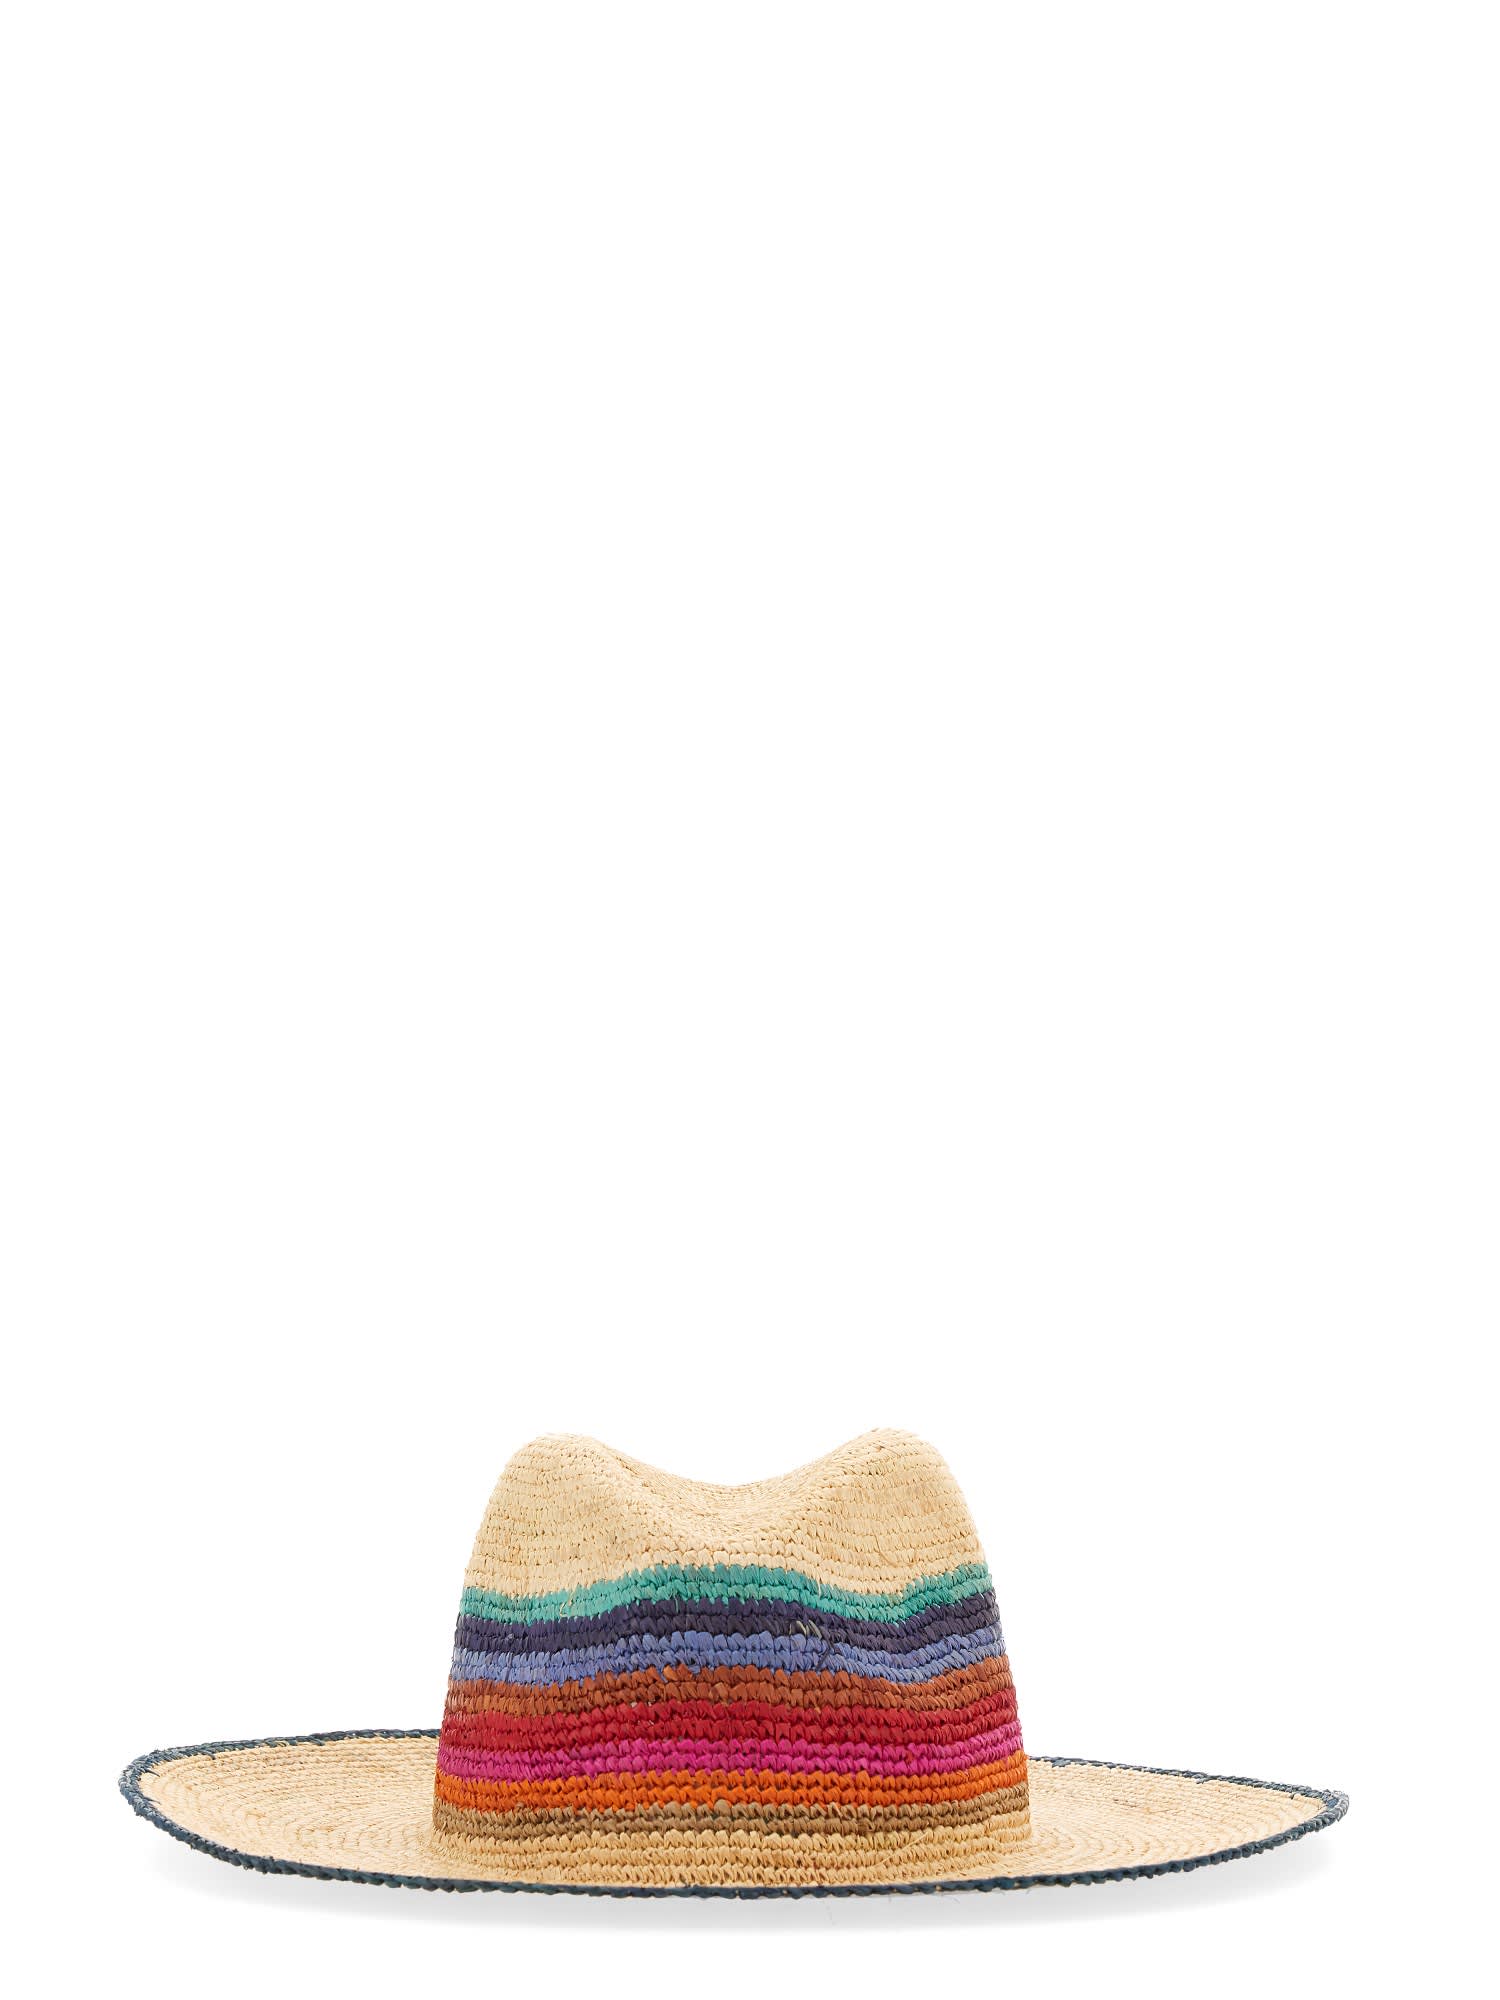 PAUL SMITH WIDE-BRIMMED STRAW HAT